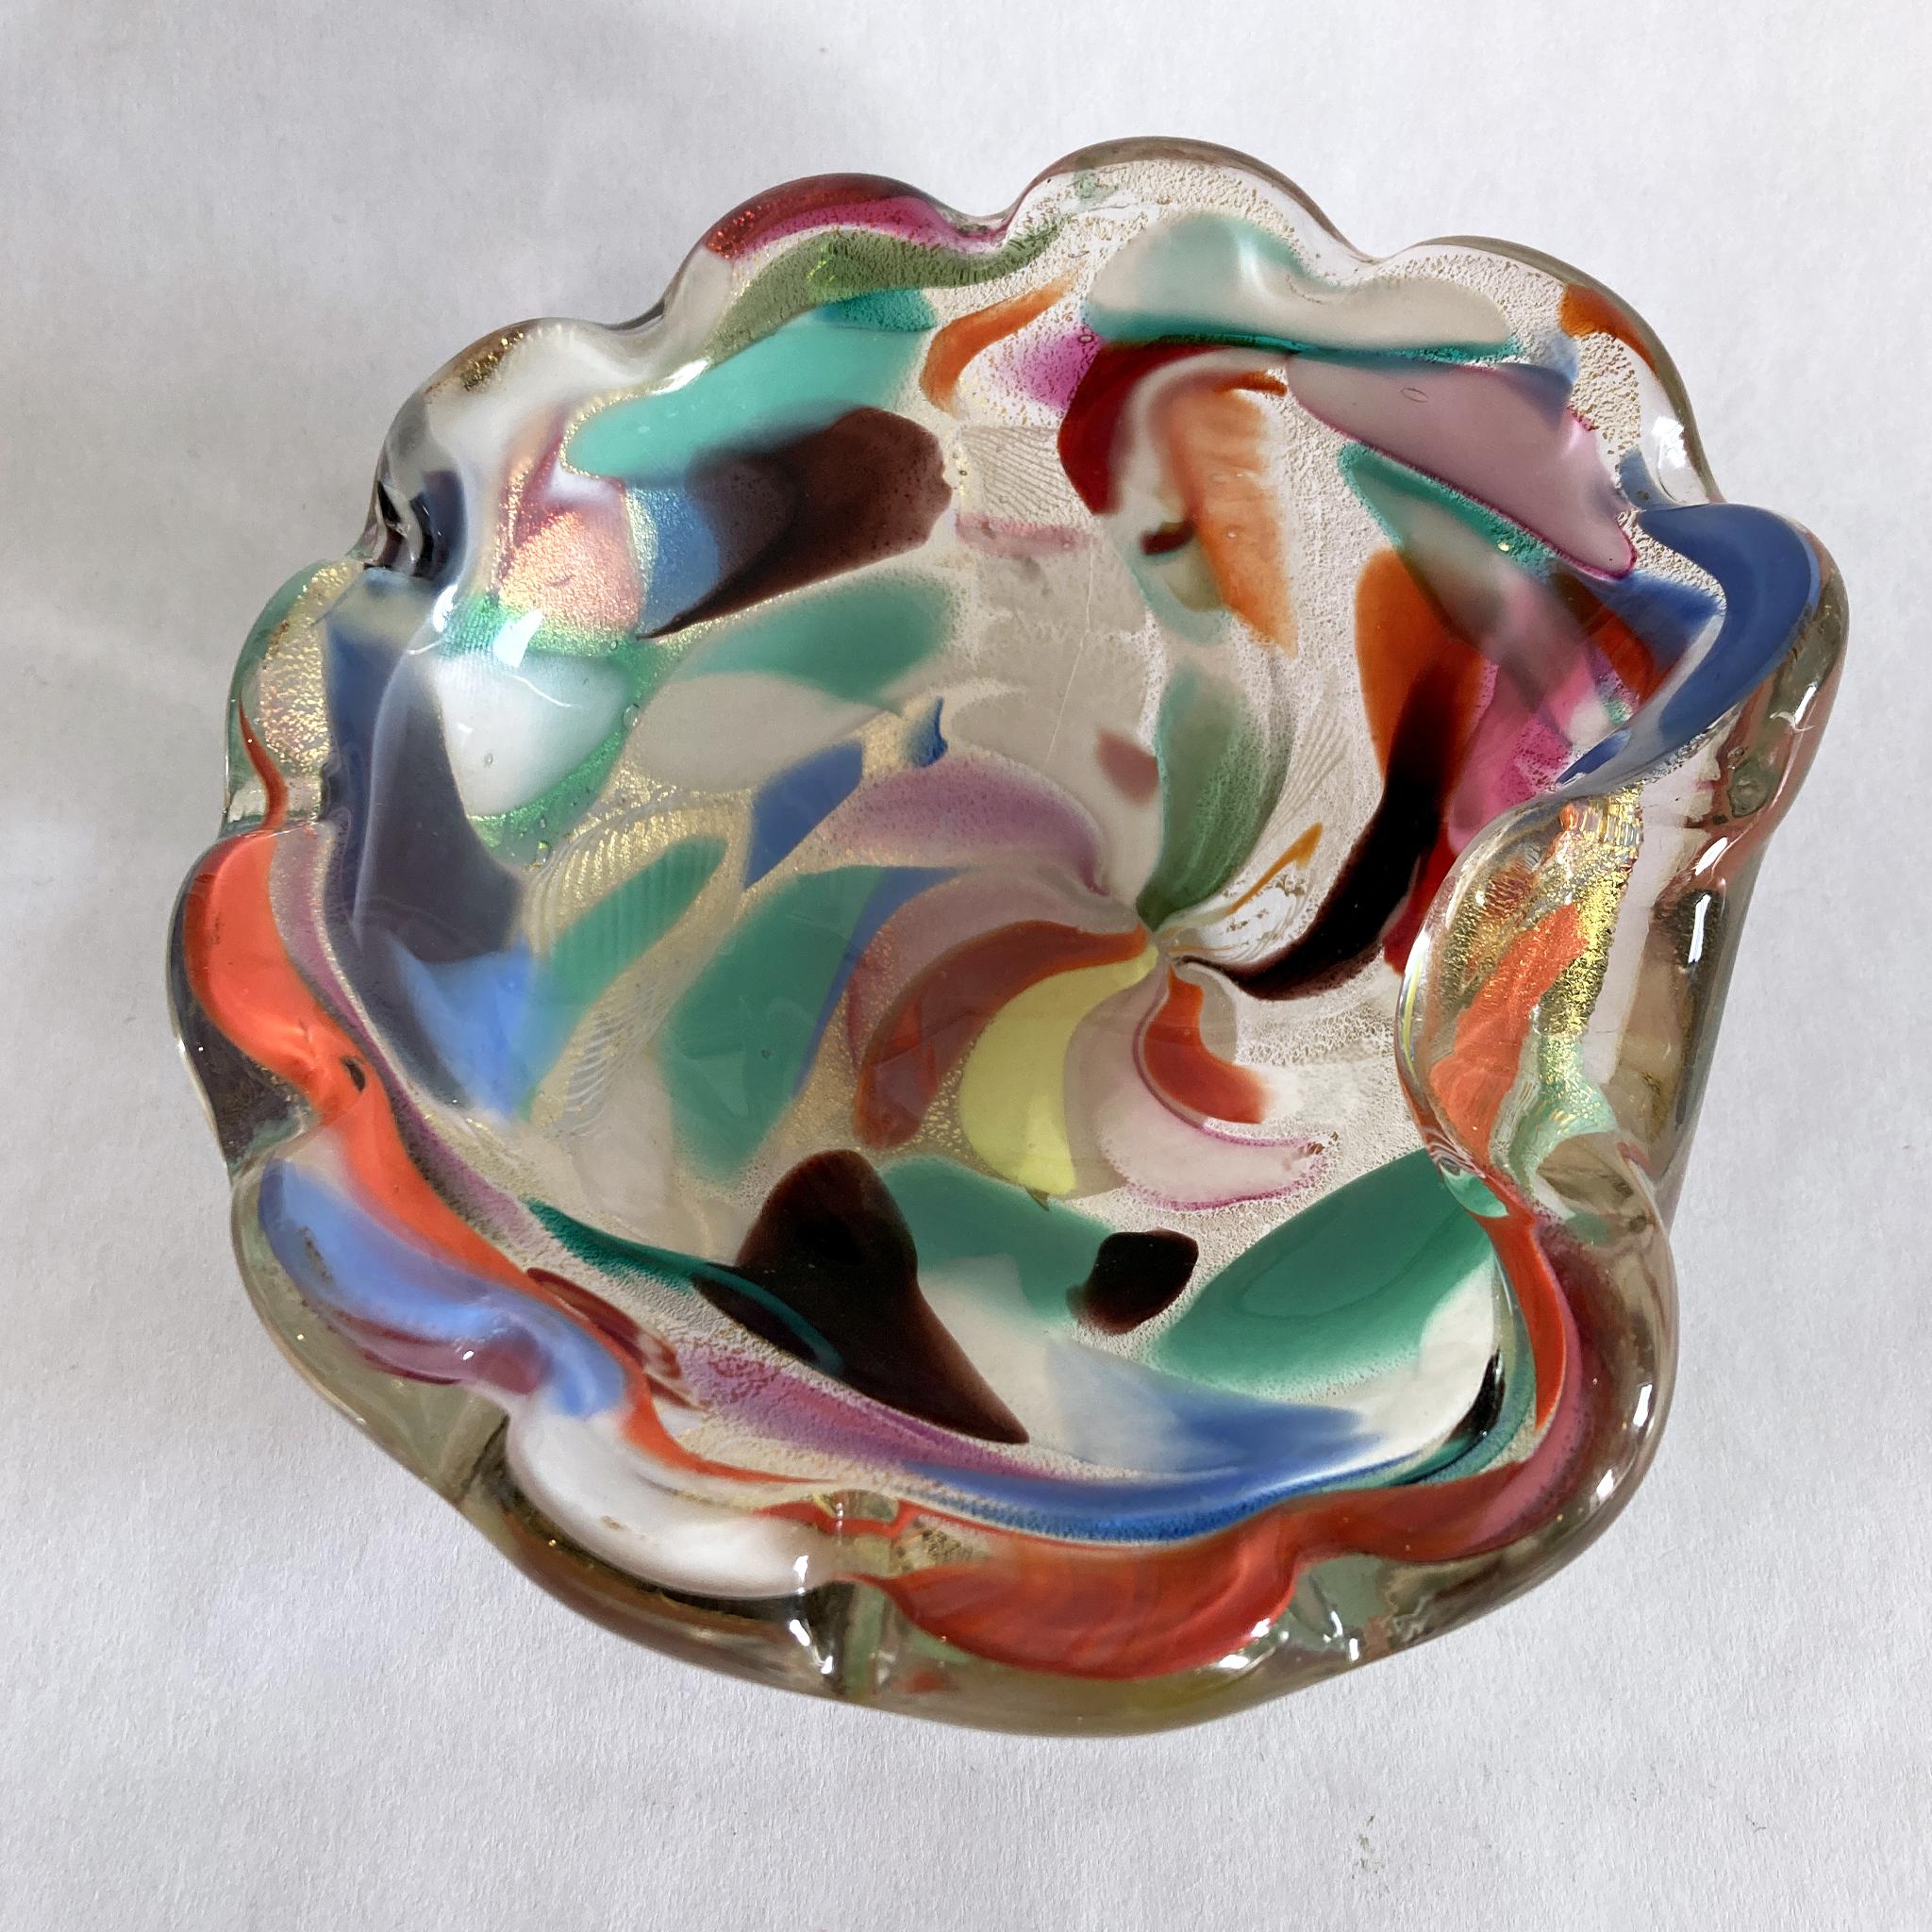 Stunning, unique Murano hand blown bowl/ catchall. Bold colors swirl through this Arte Vetraria Muranese (AVEM) scalloped-edge bowl, with gold underneath. The glass glitters when the light hits this piece at different angles. Shades of blue, pink,